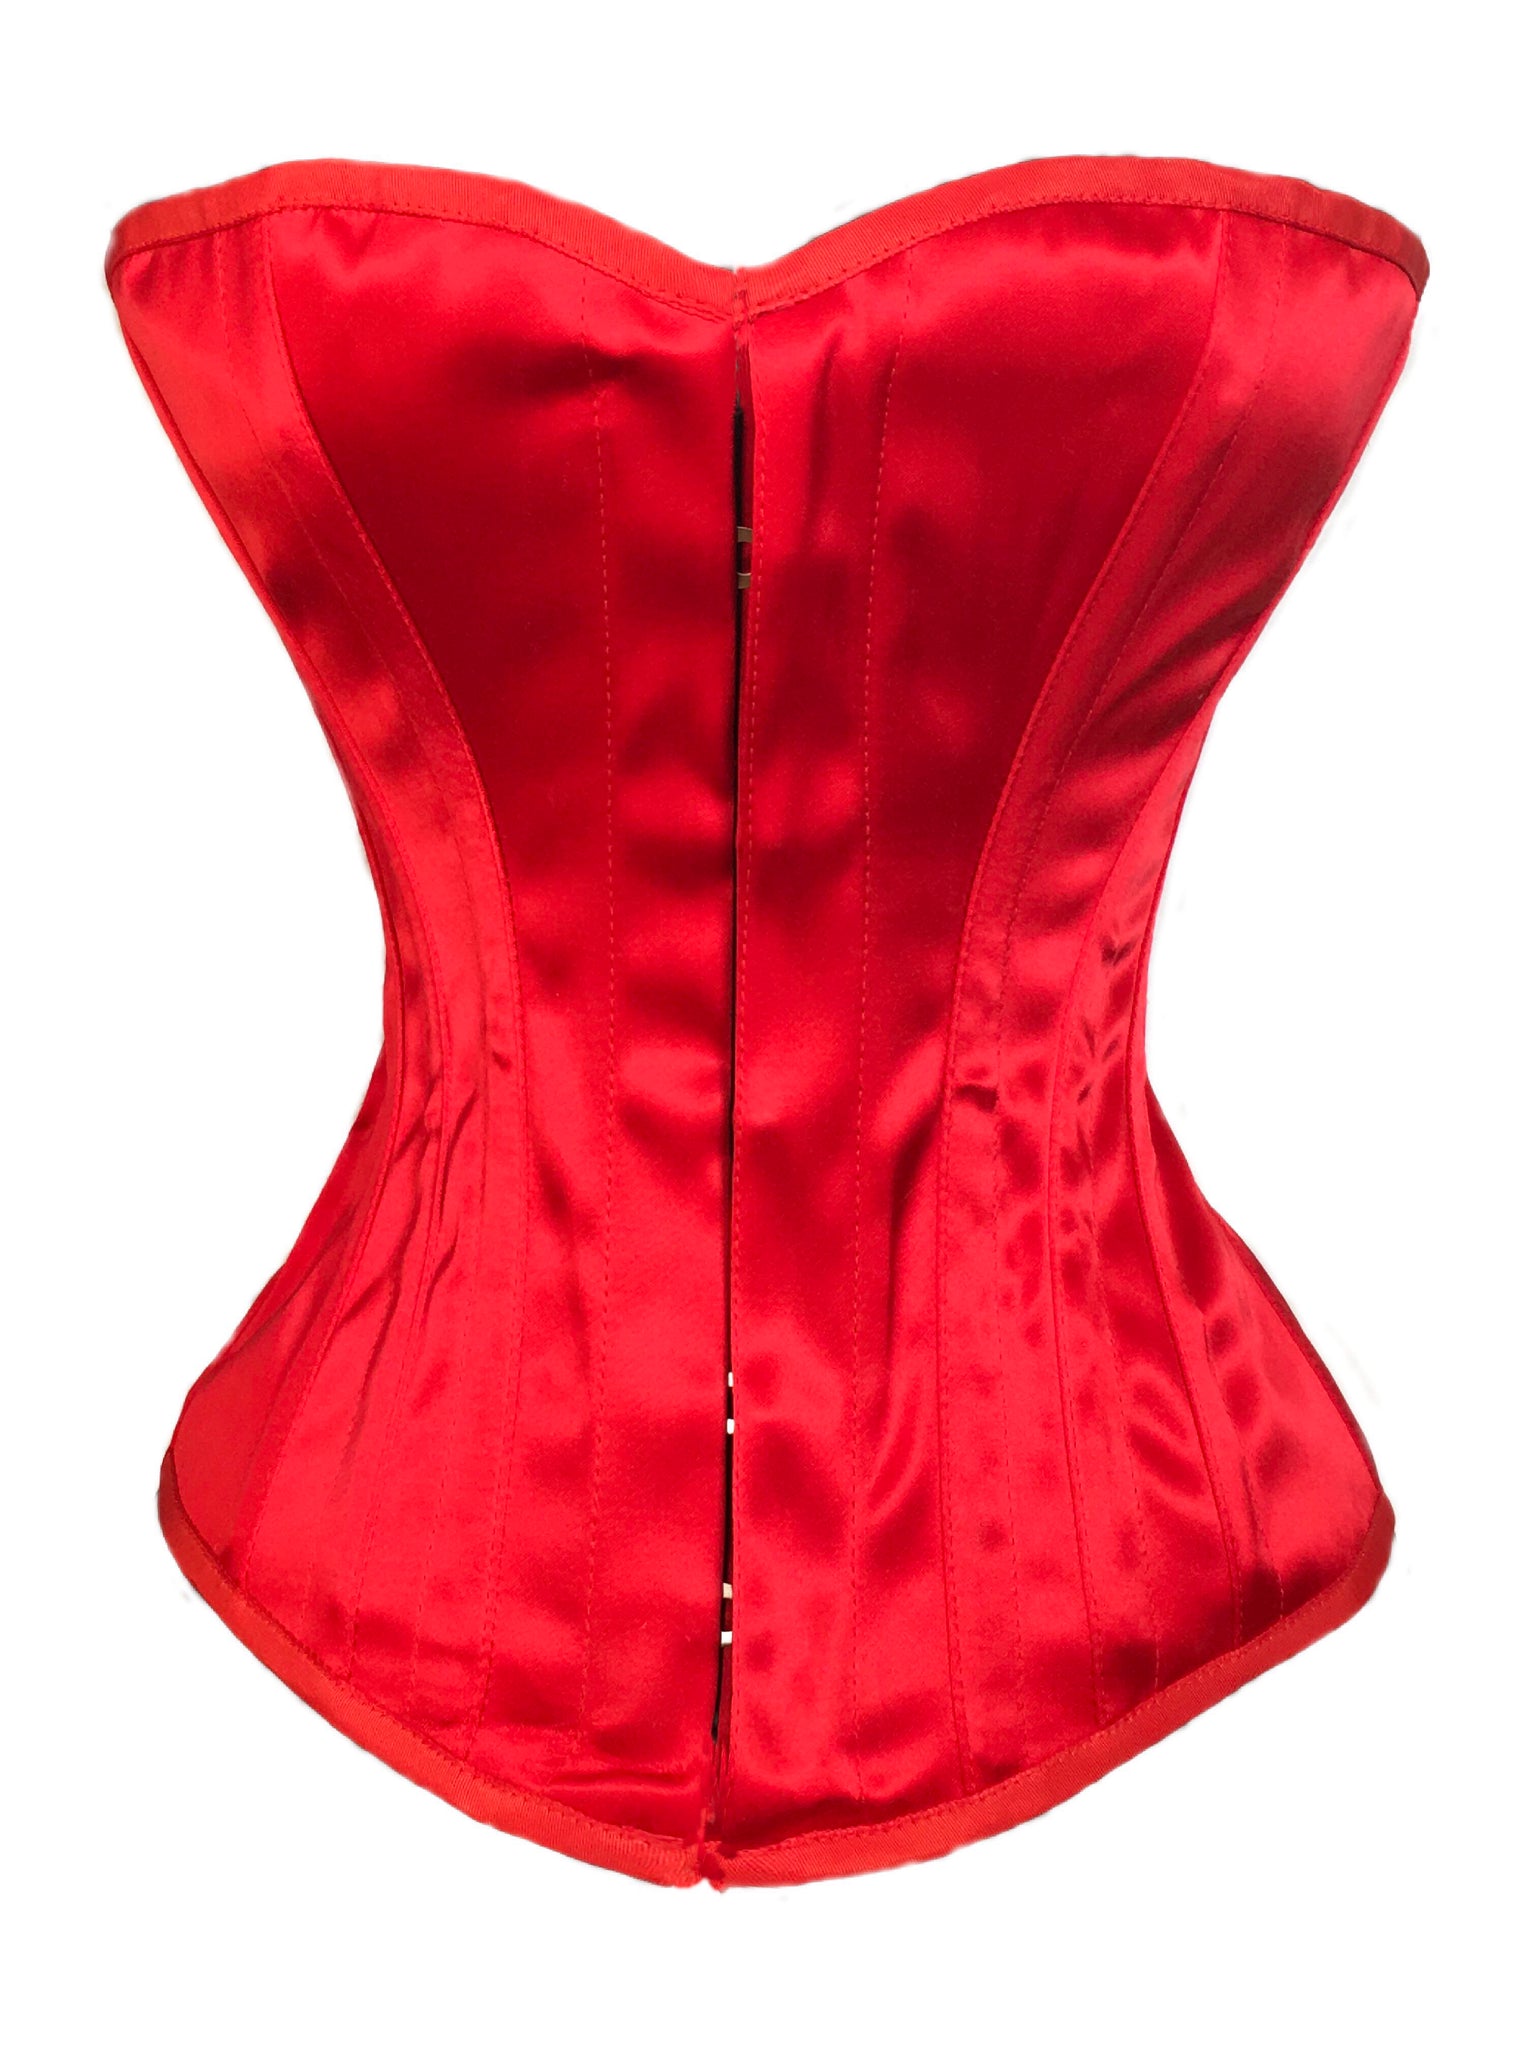 Classic Overbust Corset in Red Satin